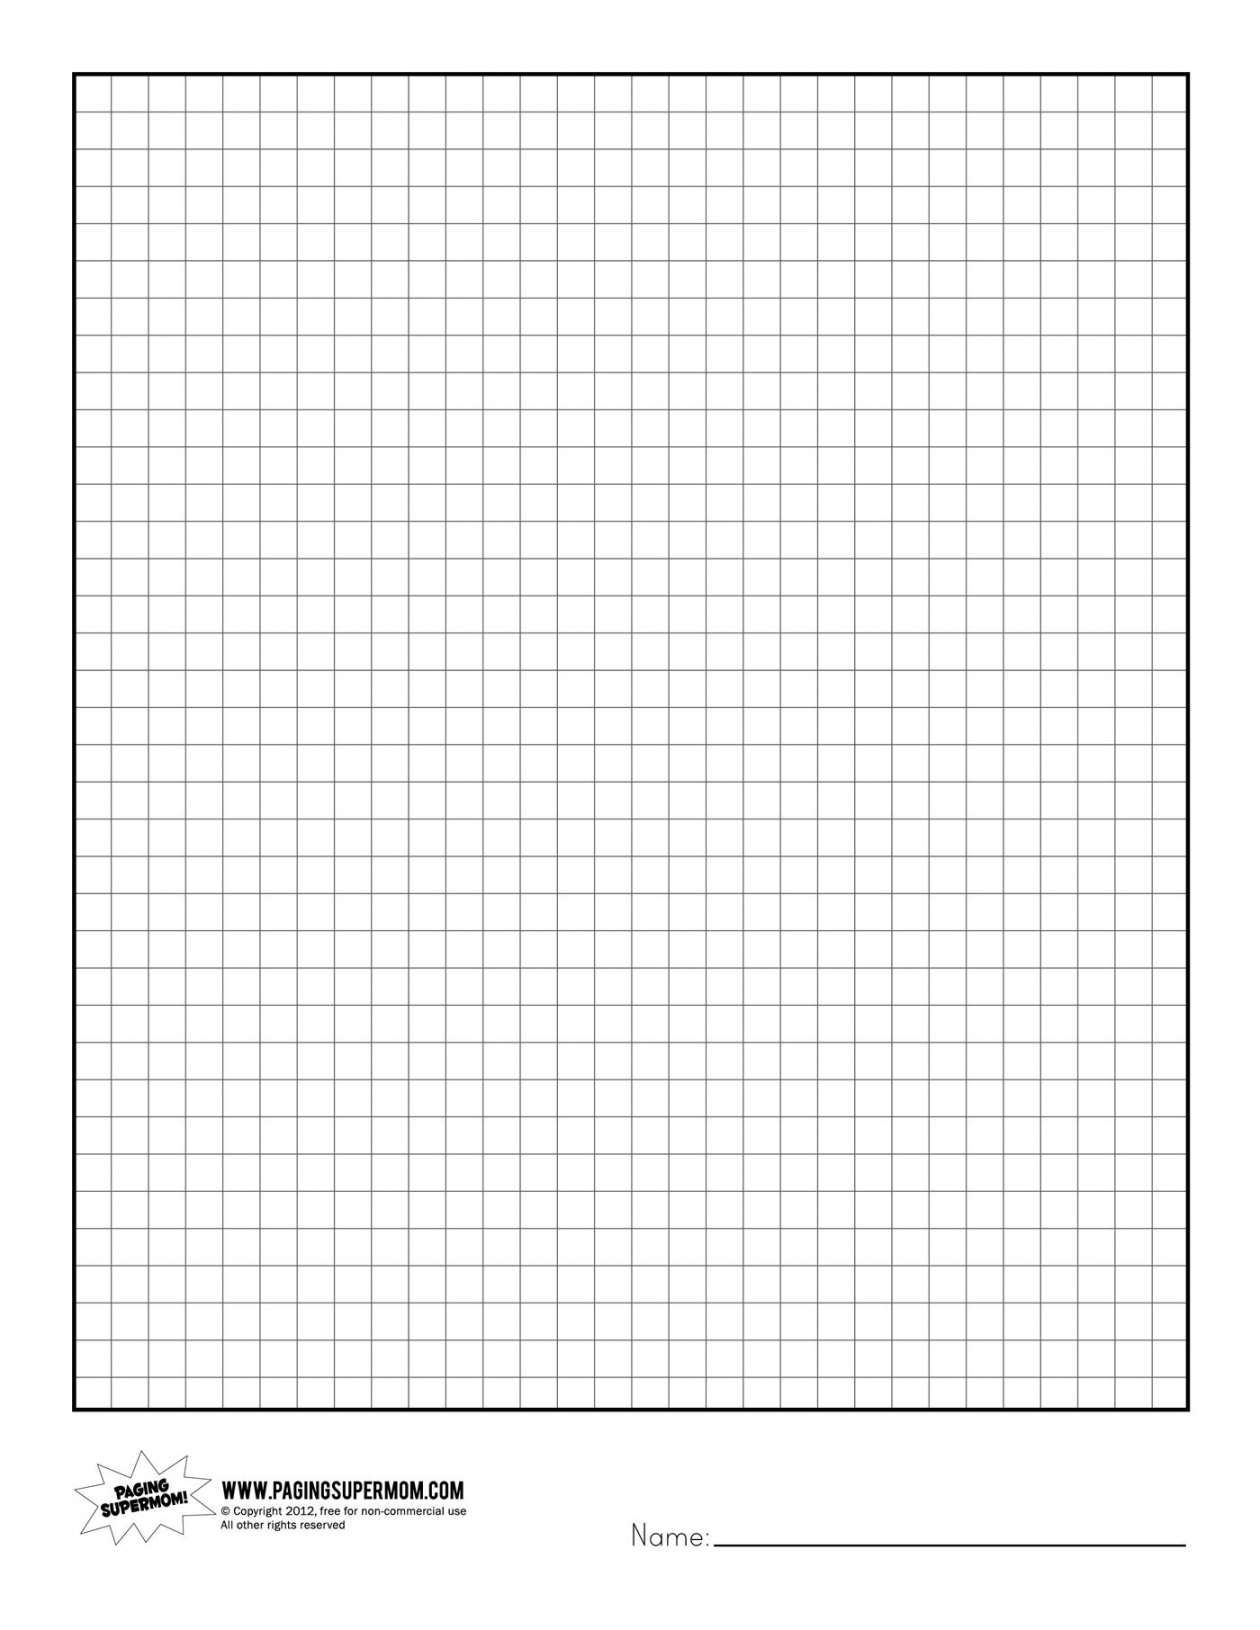 Pin on Healthy eating - FREE Printables - Free Graph Paper To Print